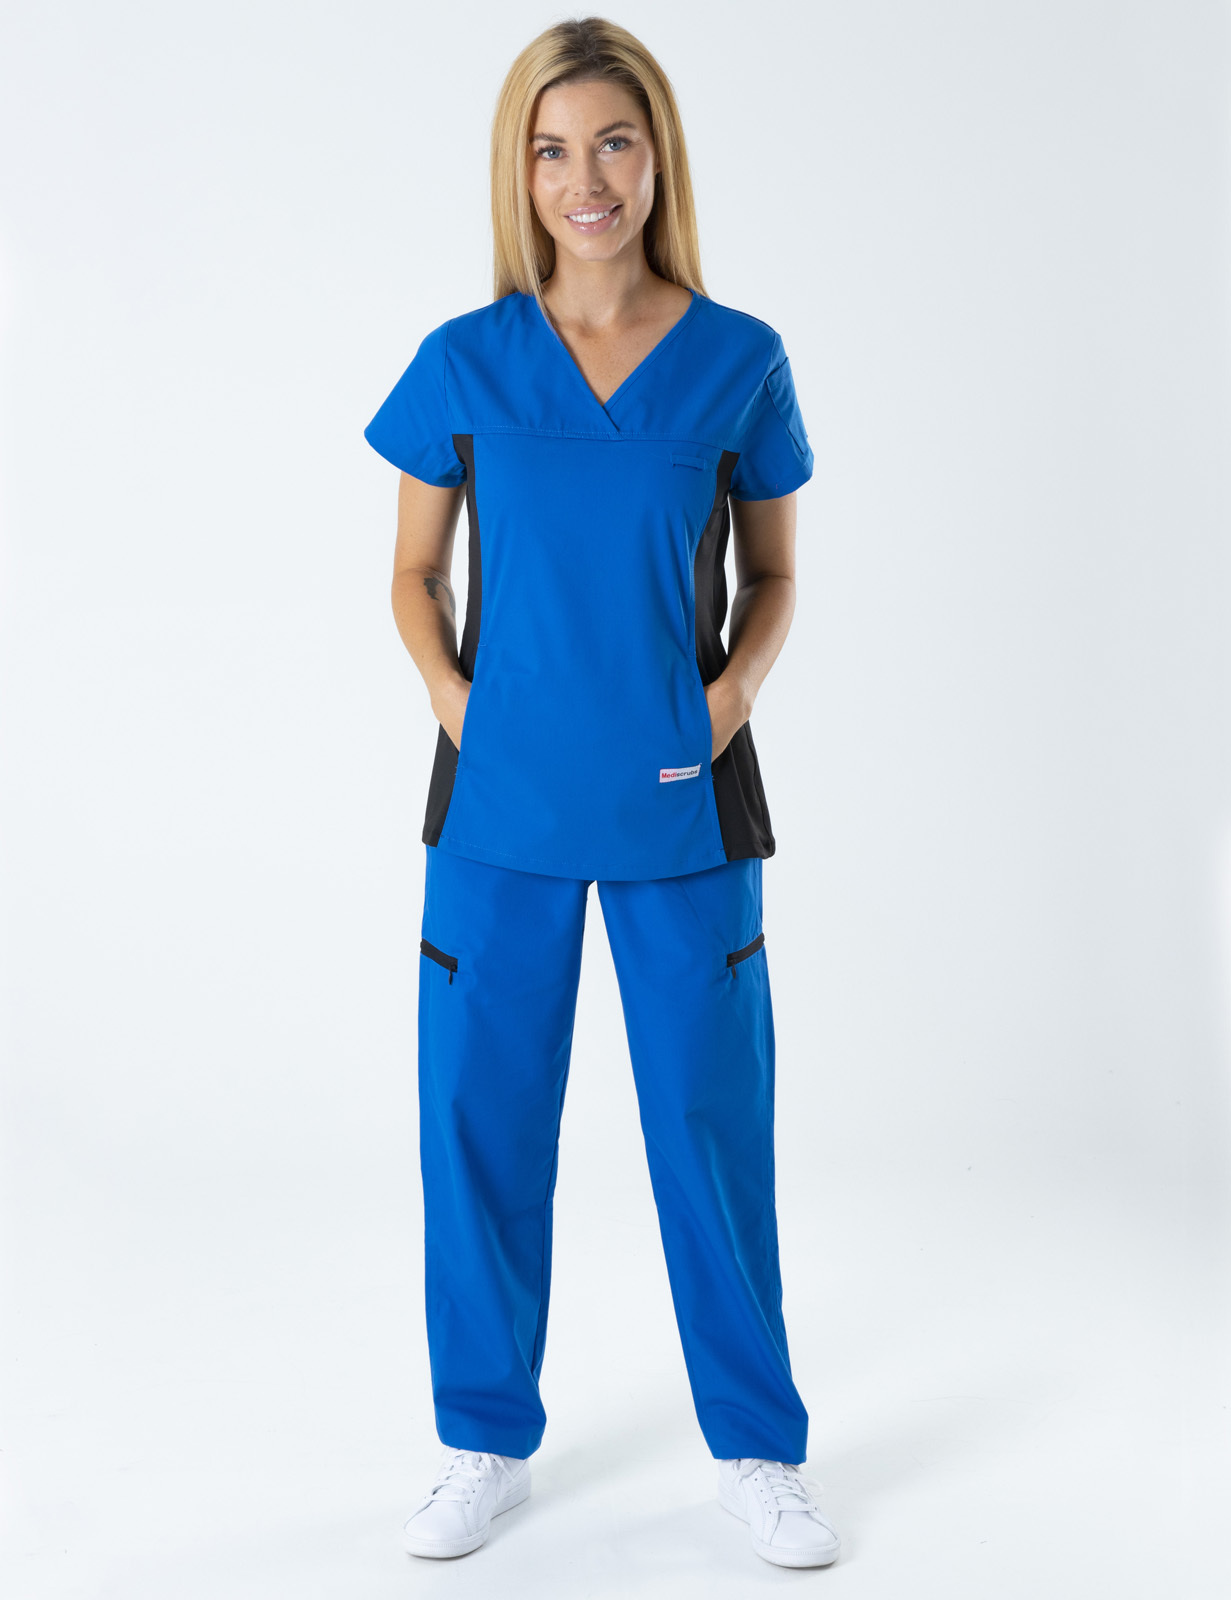 Canberra Hospital Medical Imaging Radiographer Uniform Set Bundle (Wome'ns Fit Spandex Top and Cargo Pants in Royal + Logos)